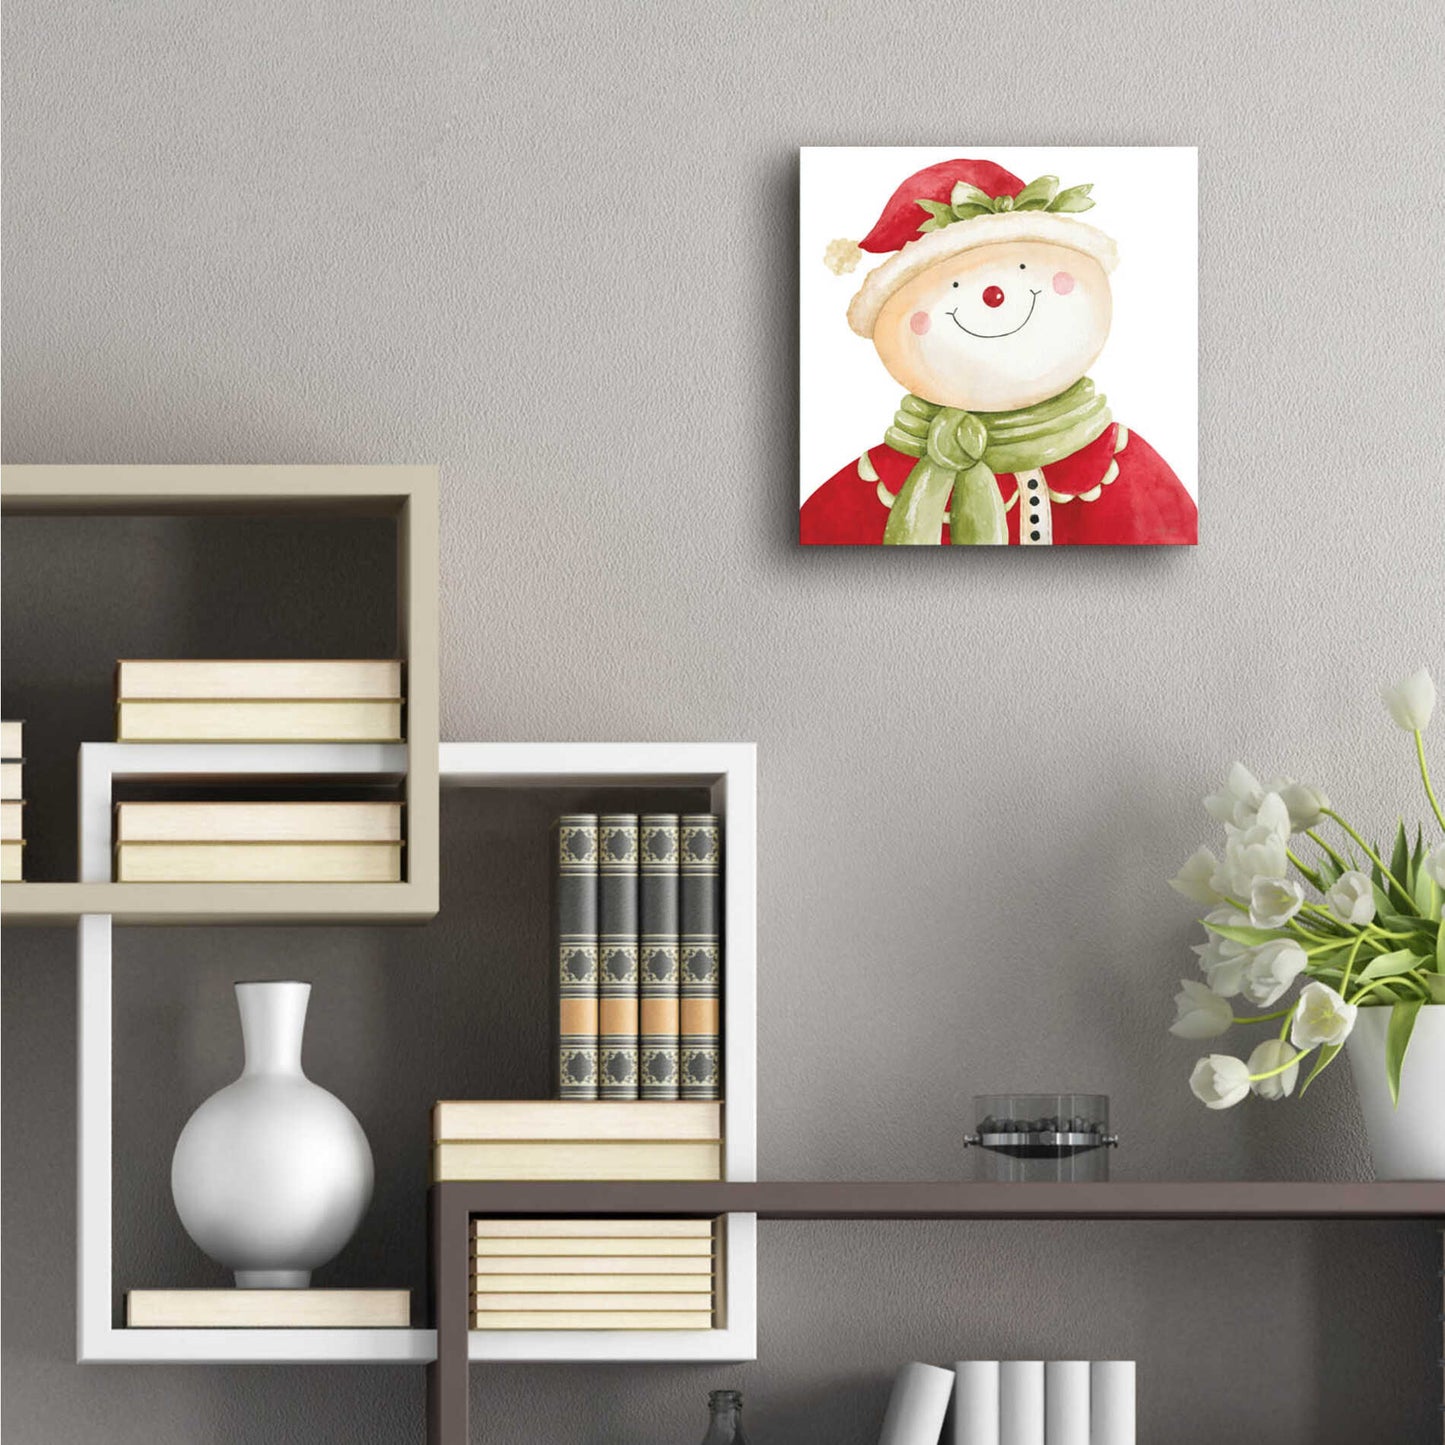 Epic Art 'Holiday Snowman' by Cindy Jacobs, Acrylic Glass Wall Art,12x12